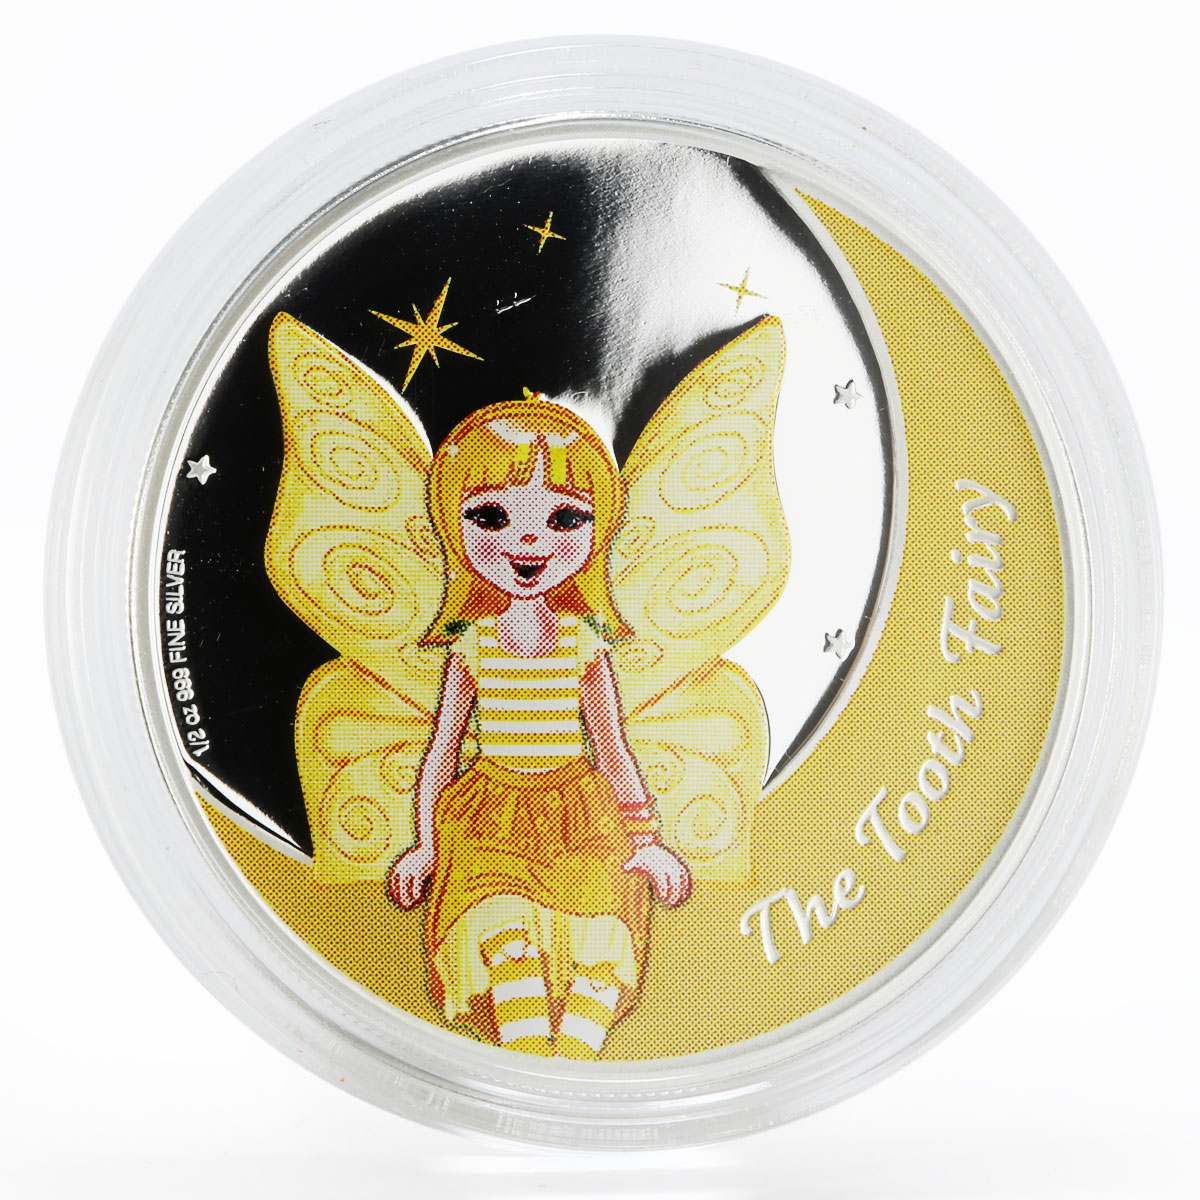 Niue 1 dollar The Tooth Fairy colored proof silver coin 2013